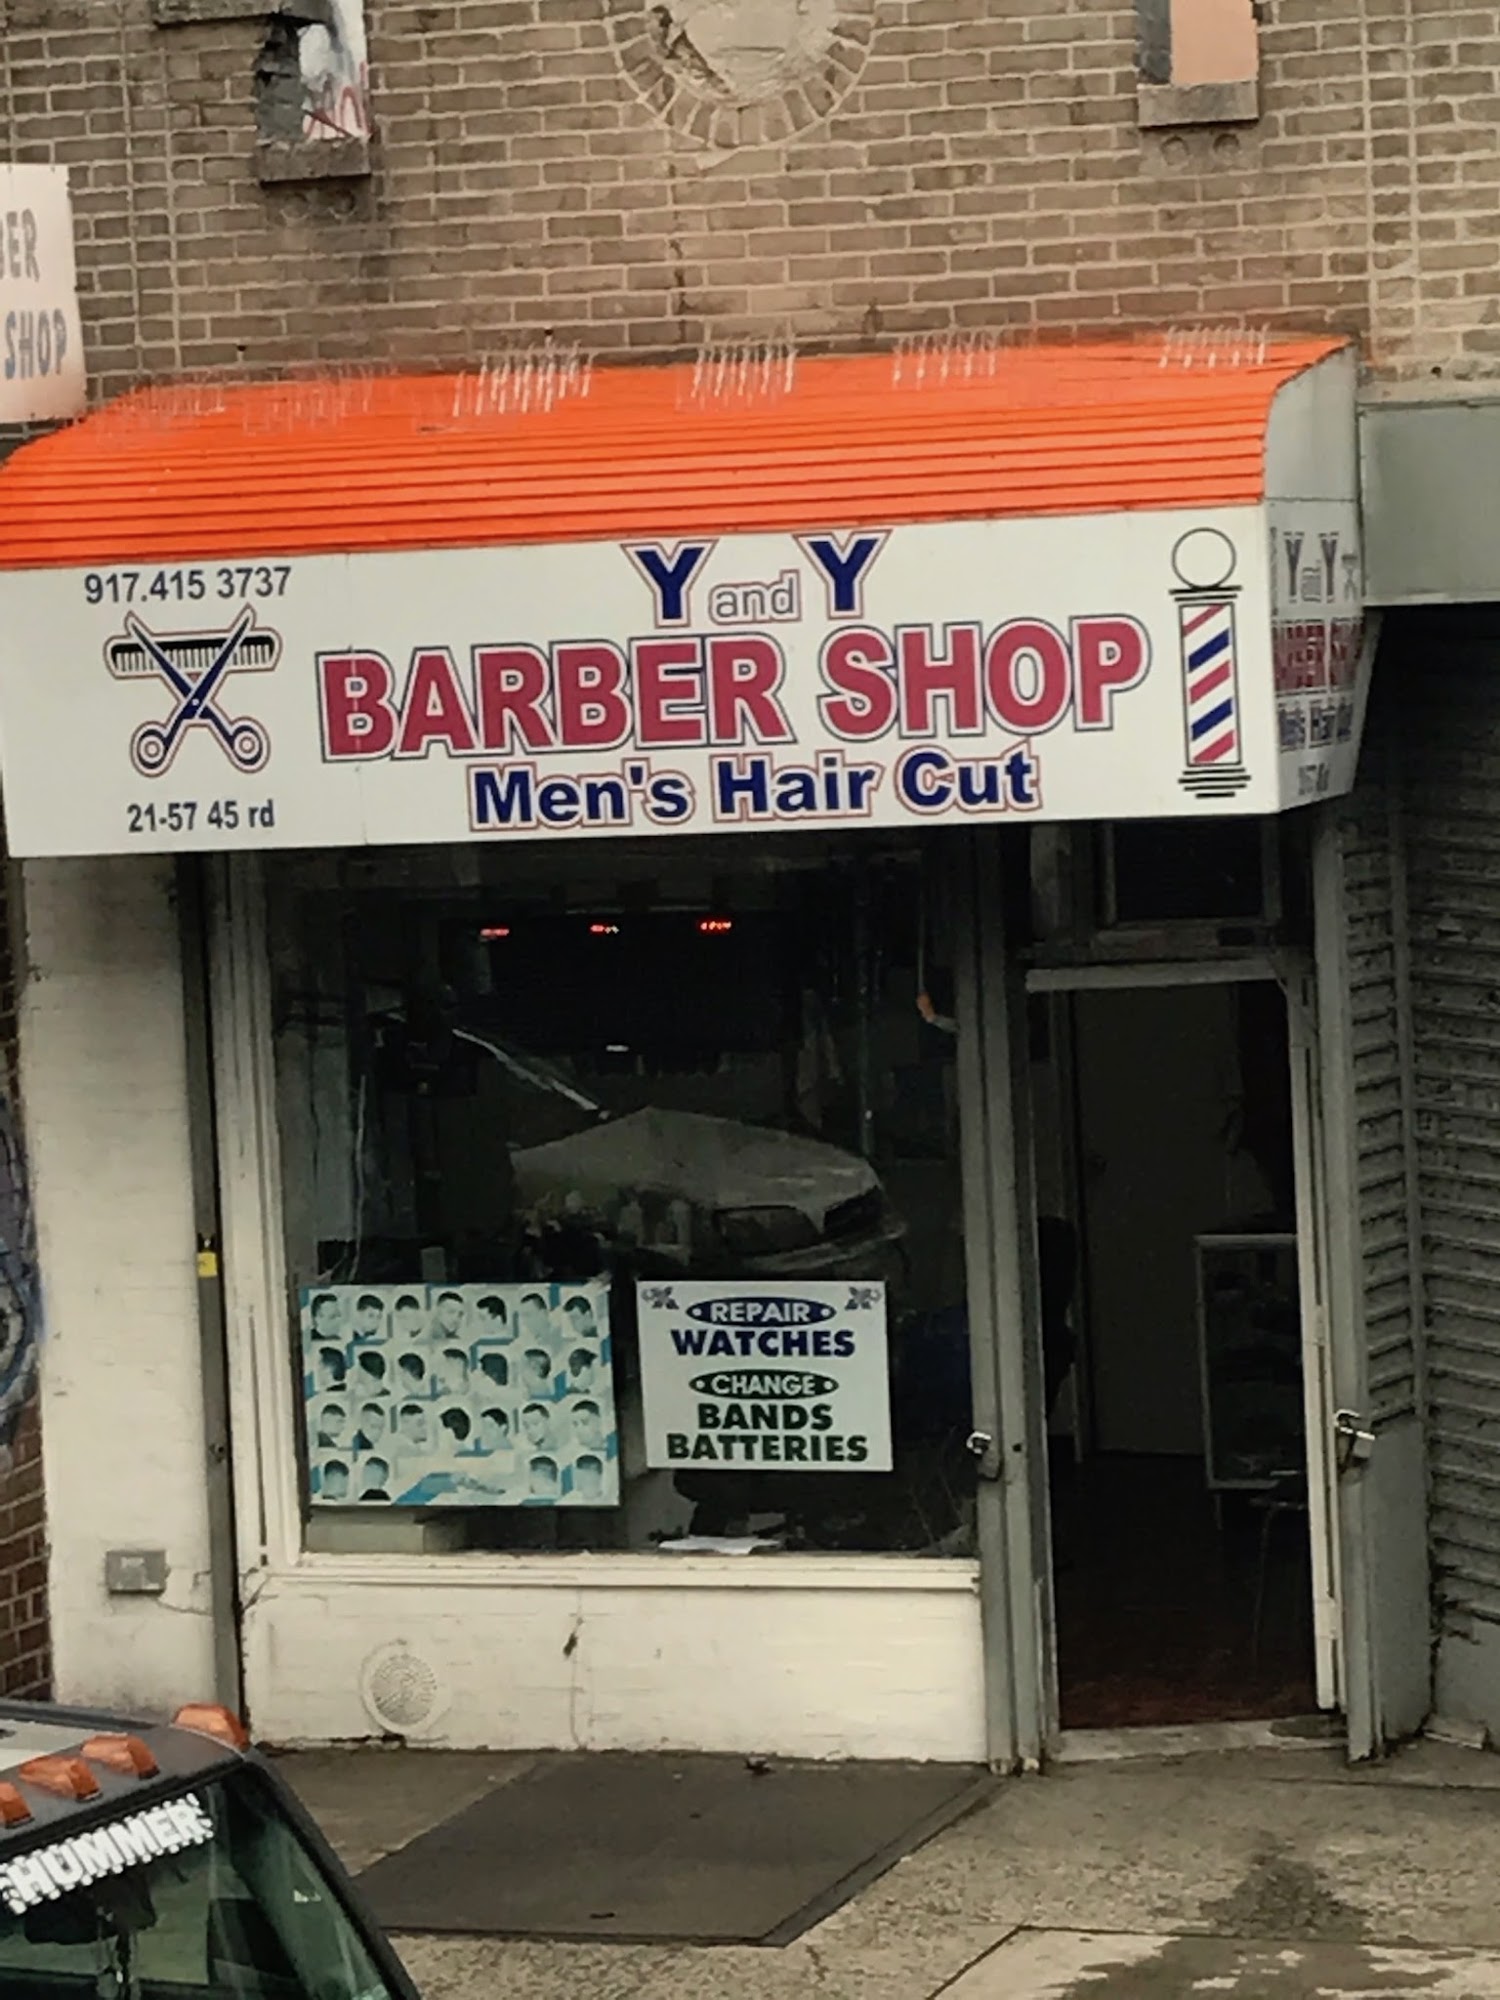 Y and Y Barber Shop & Men's Hair Stylist